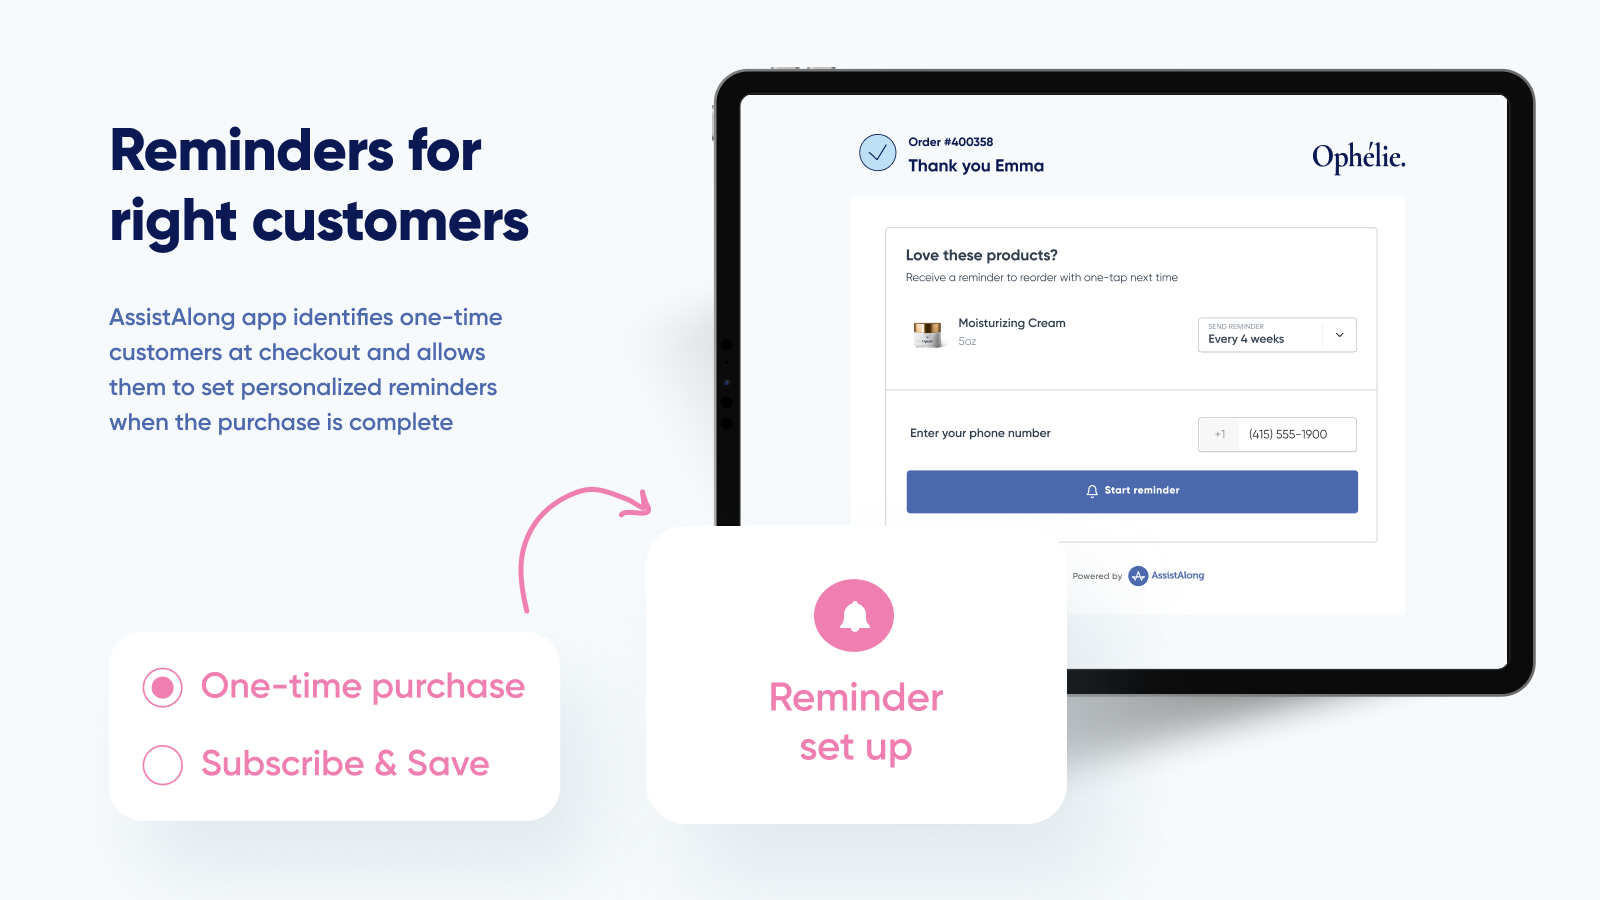 Identifies one-time customers and sets personalized reminders